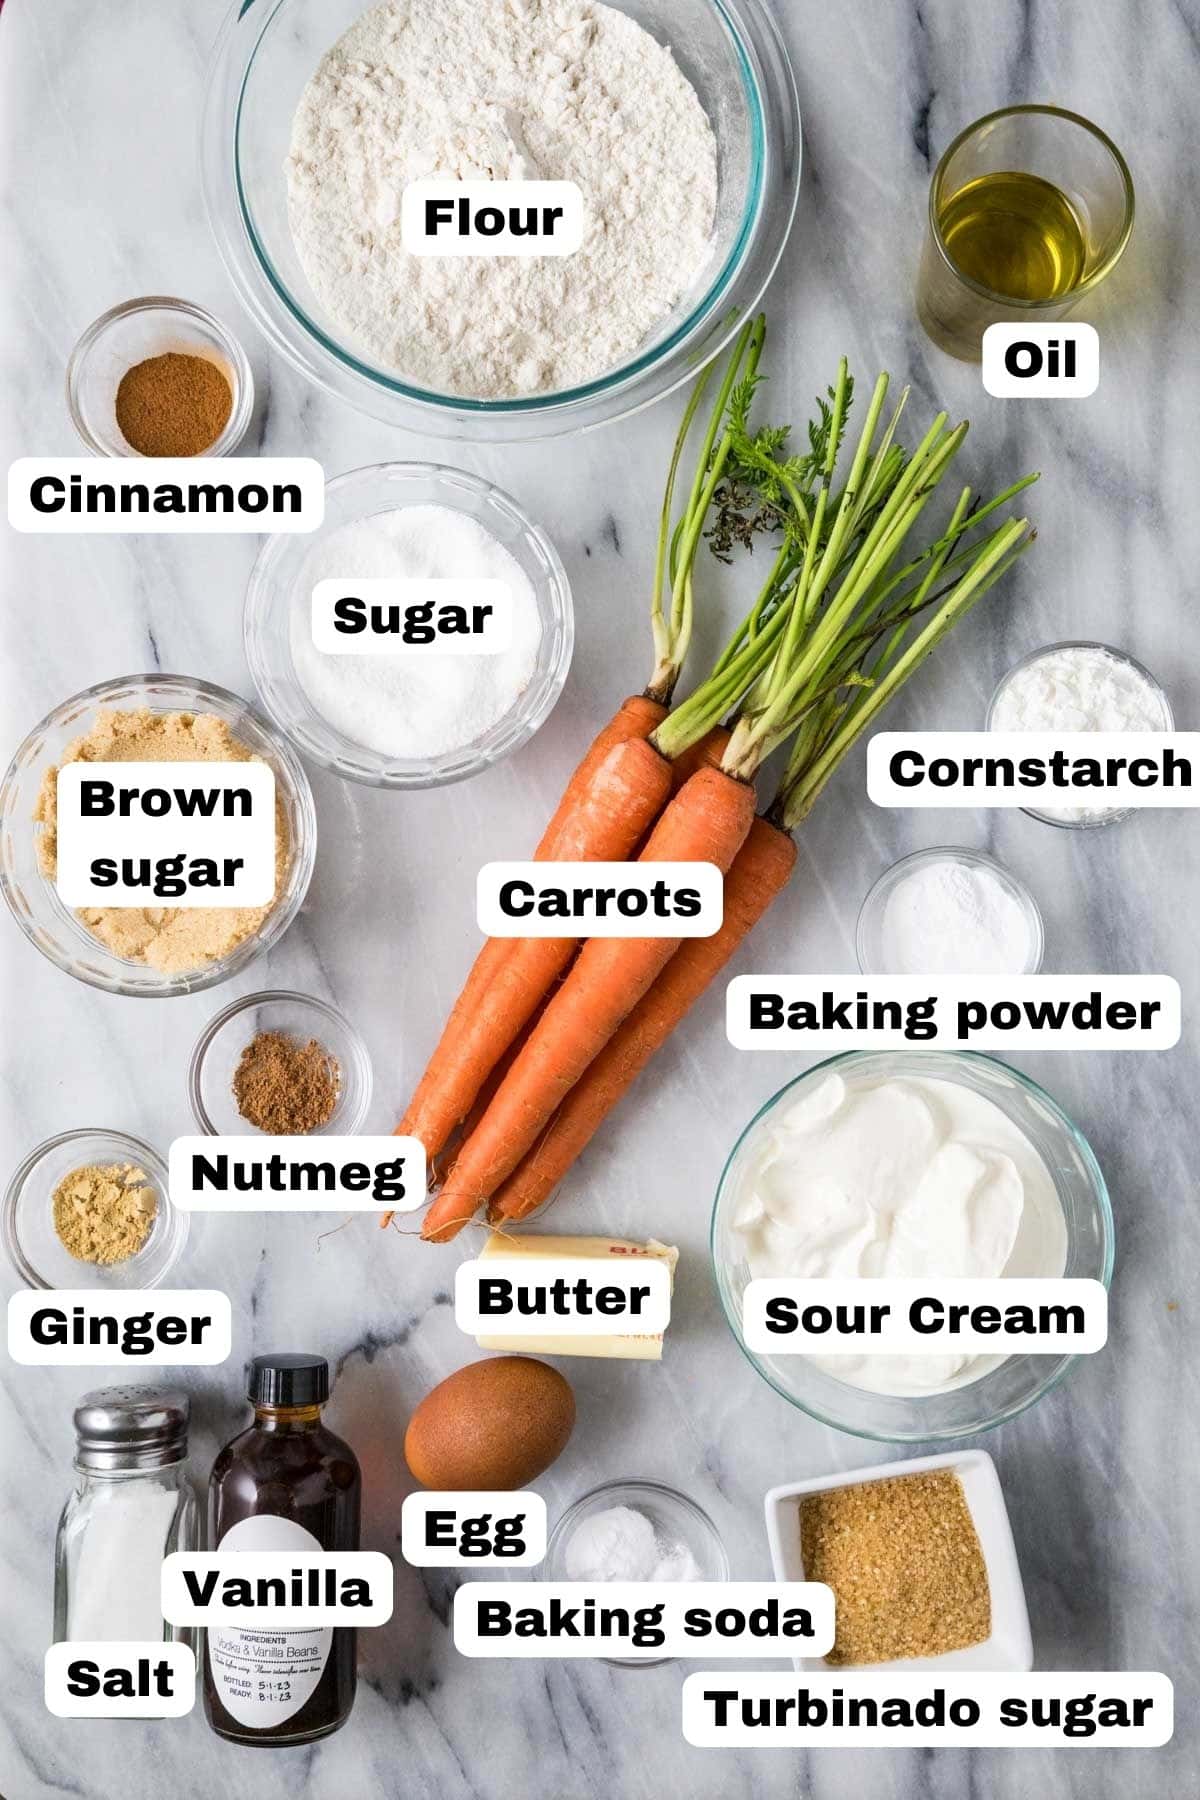 Overhead view of labelled ingredients including carrots, spices, brown sugar, and more.